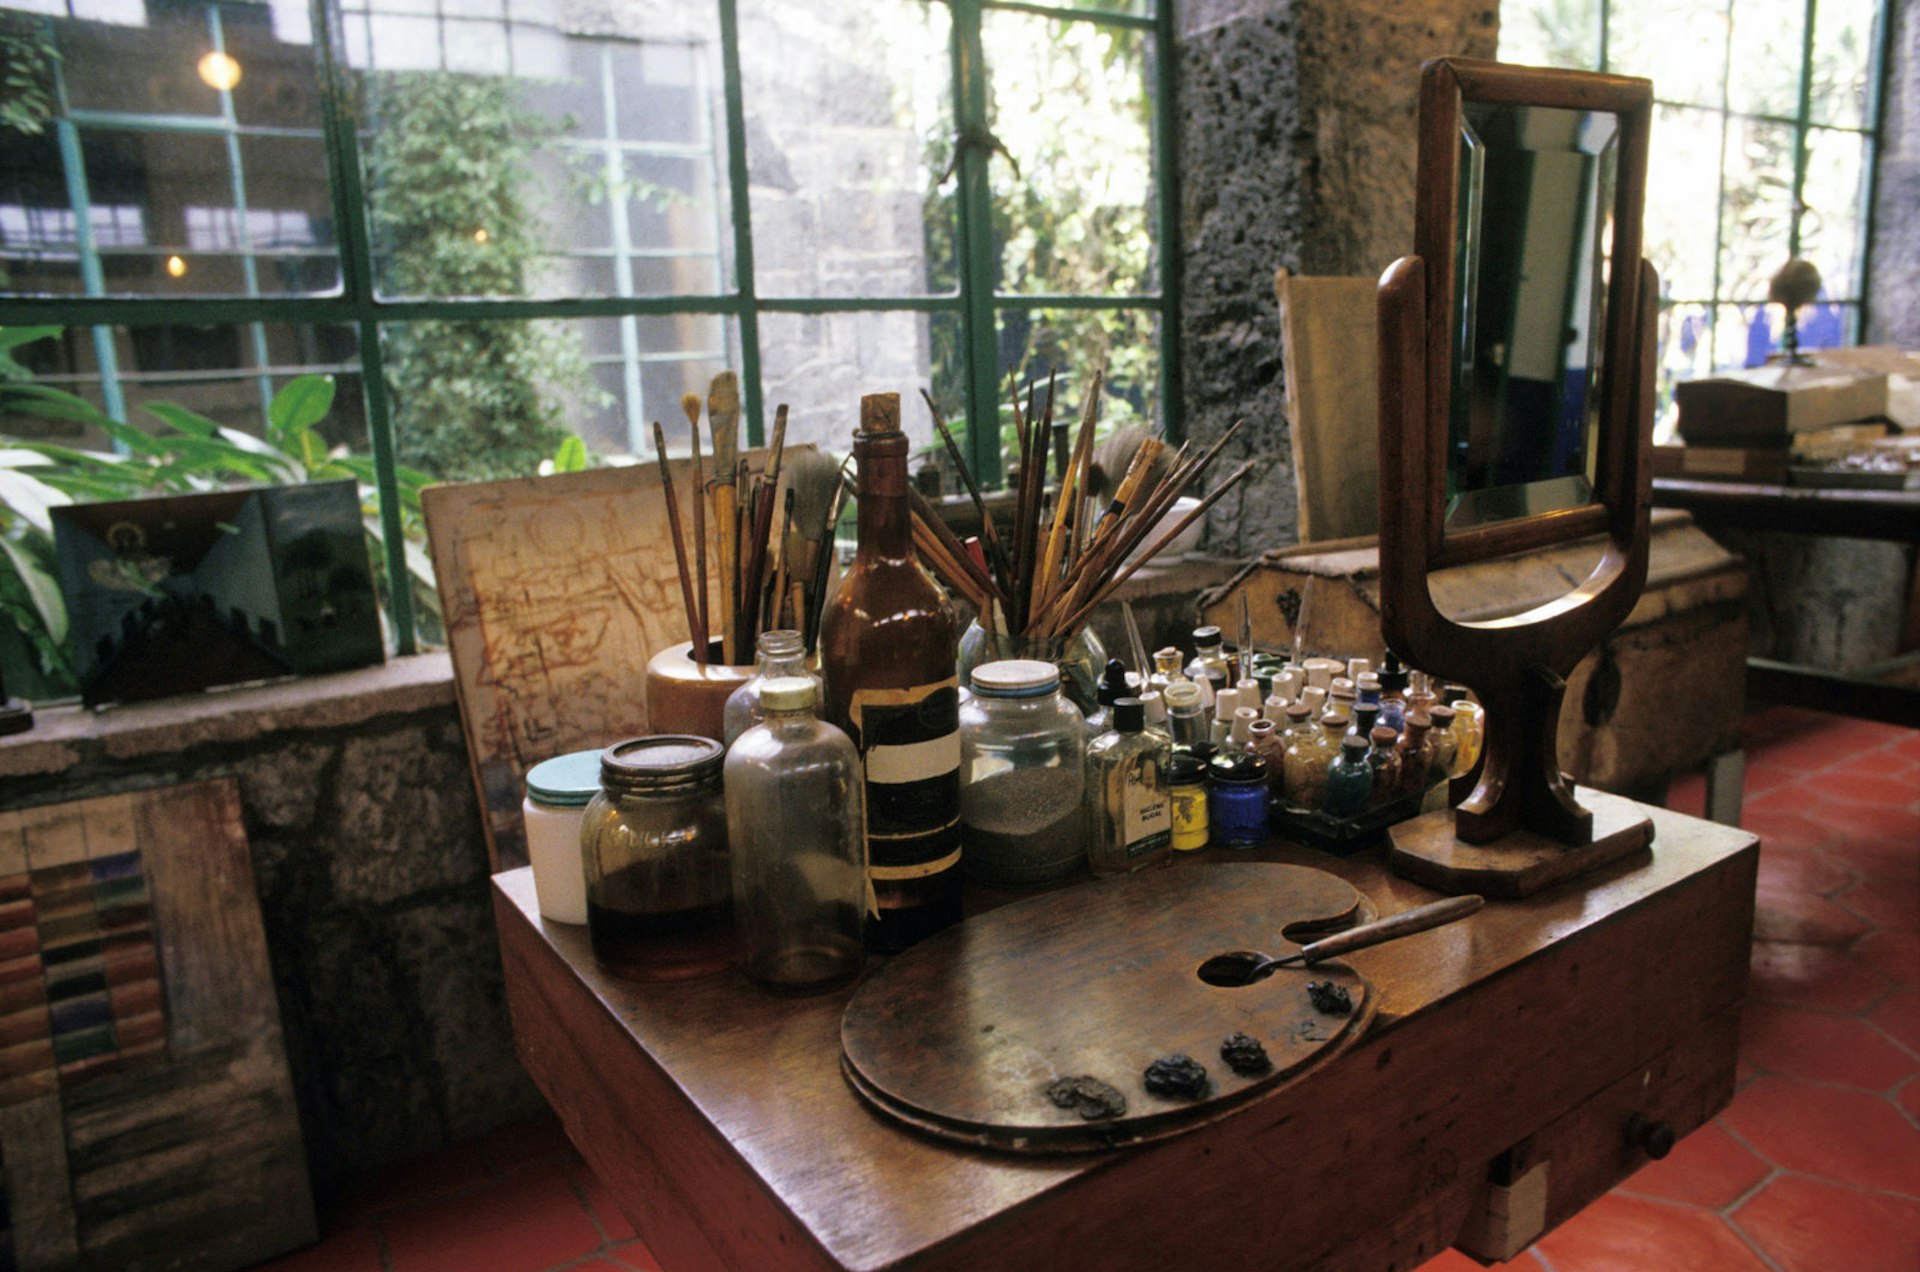 Various paints, brushes and other supplies adorn a desk